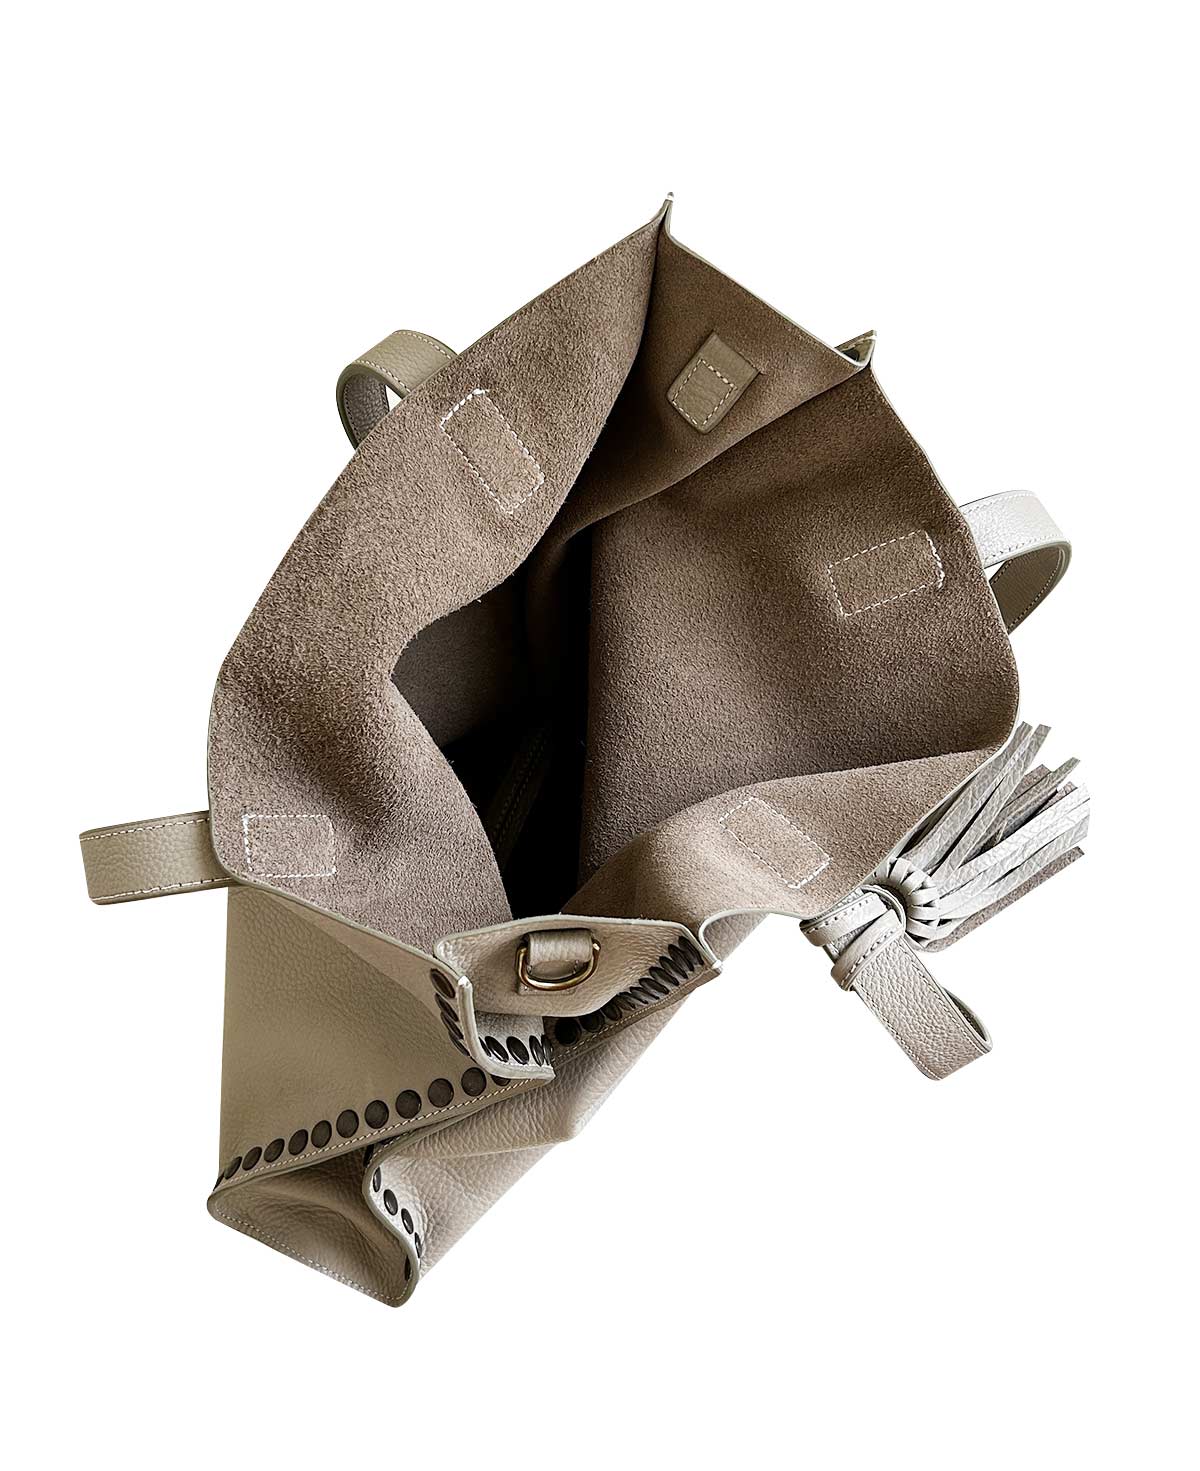 Tote Taupe Leather Tzeltal Bis Bag